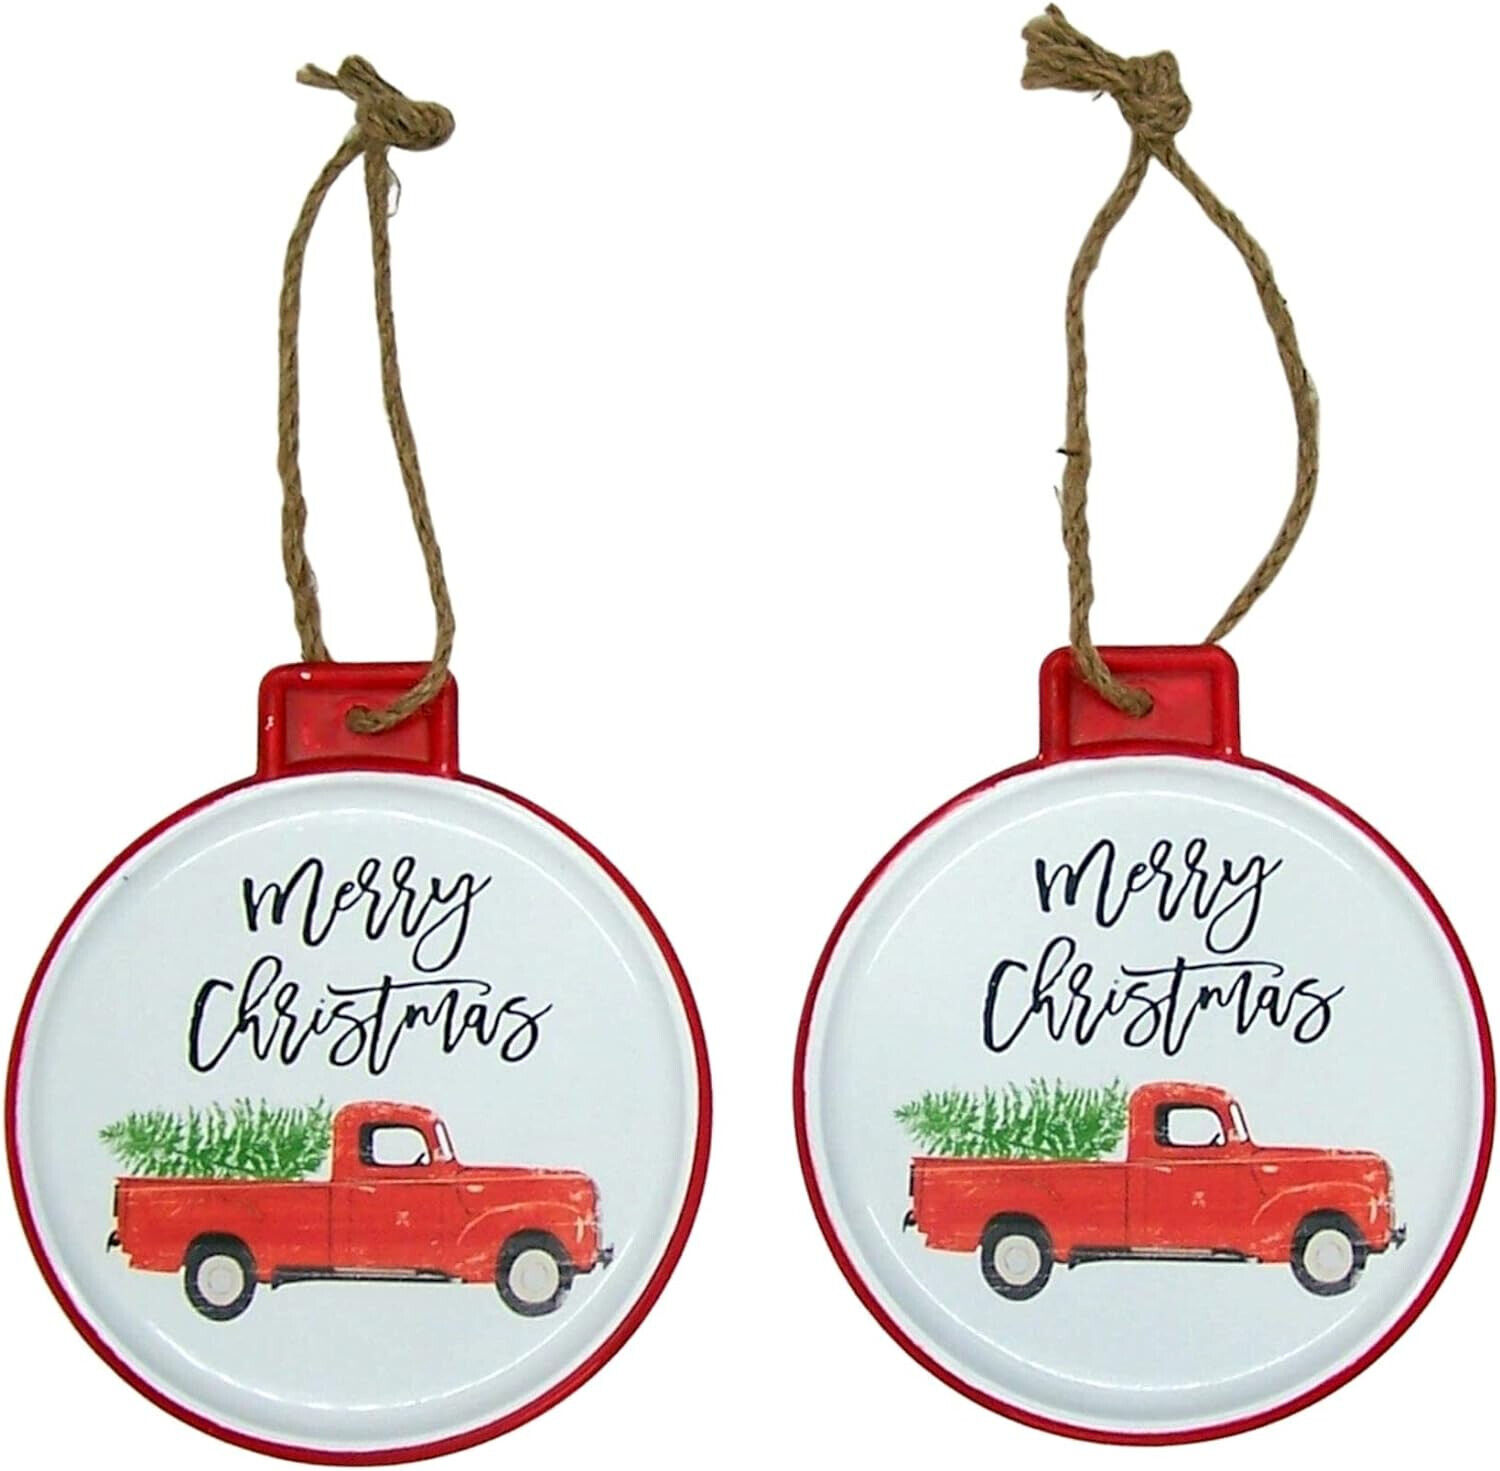 Set of 2 Round Tin Merry Christmas Ornaments, Festive Hanging Holiday Decor